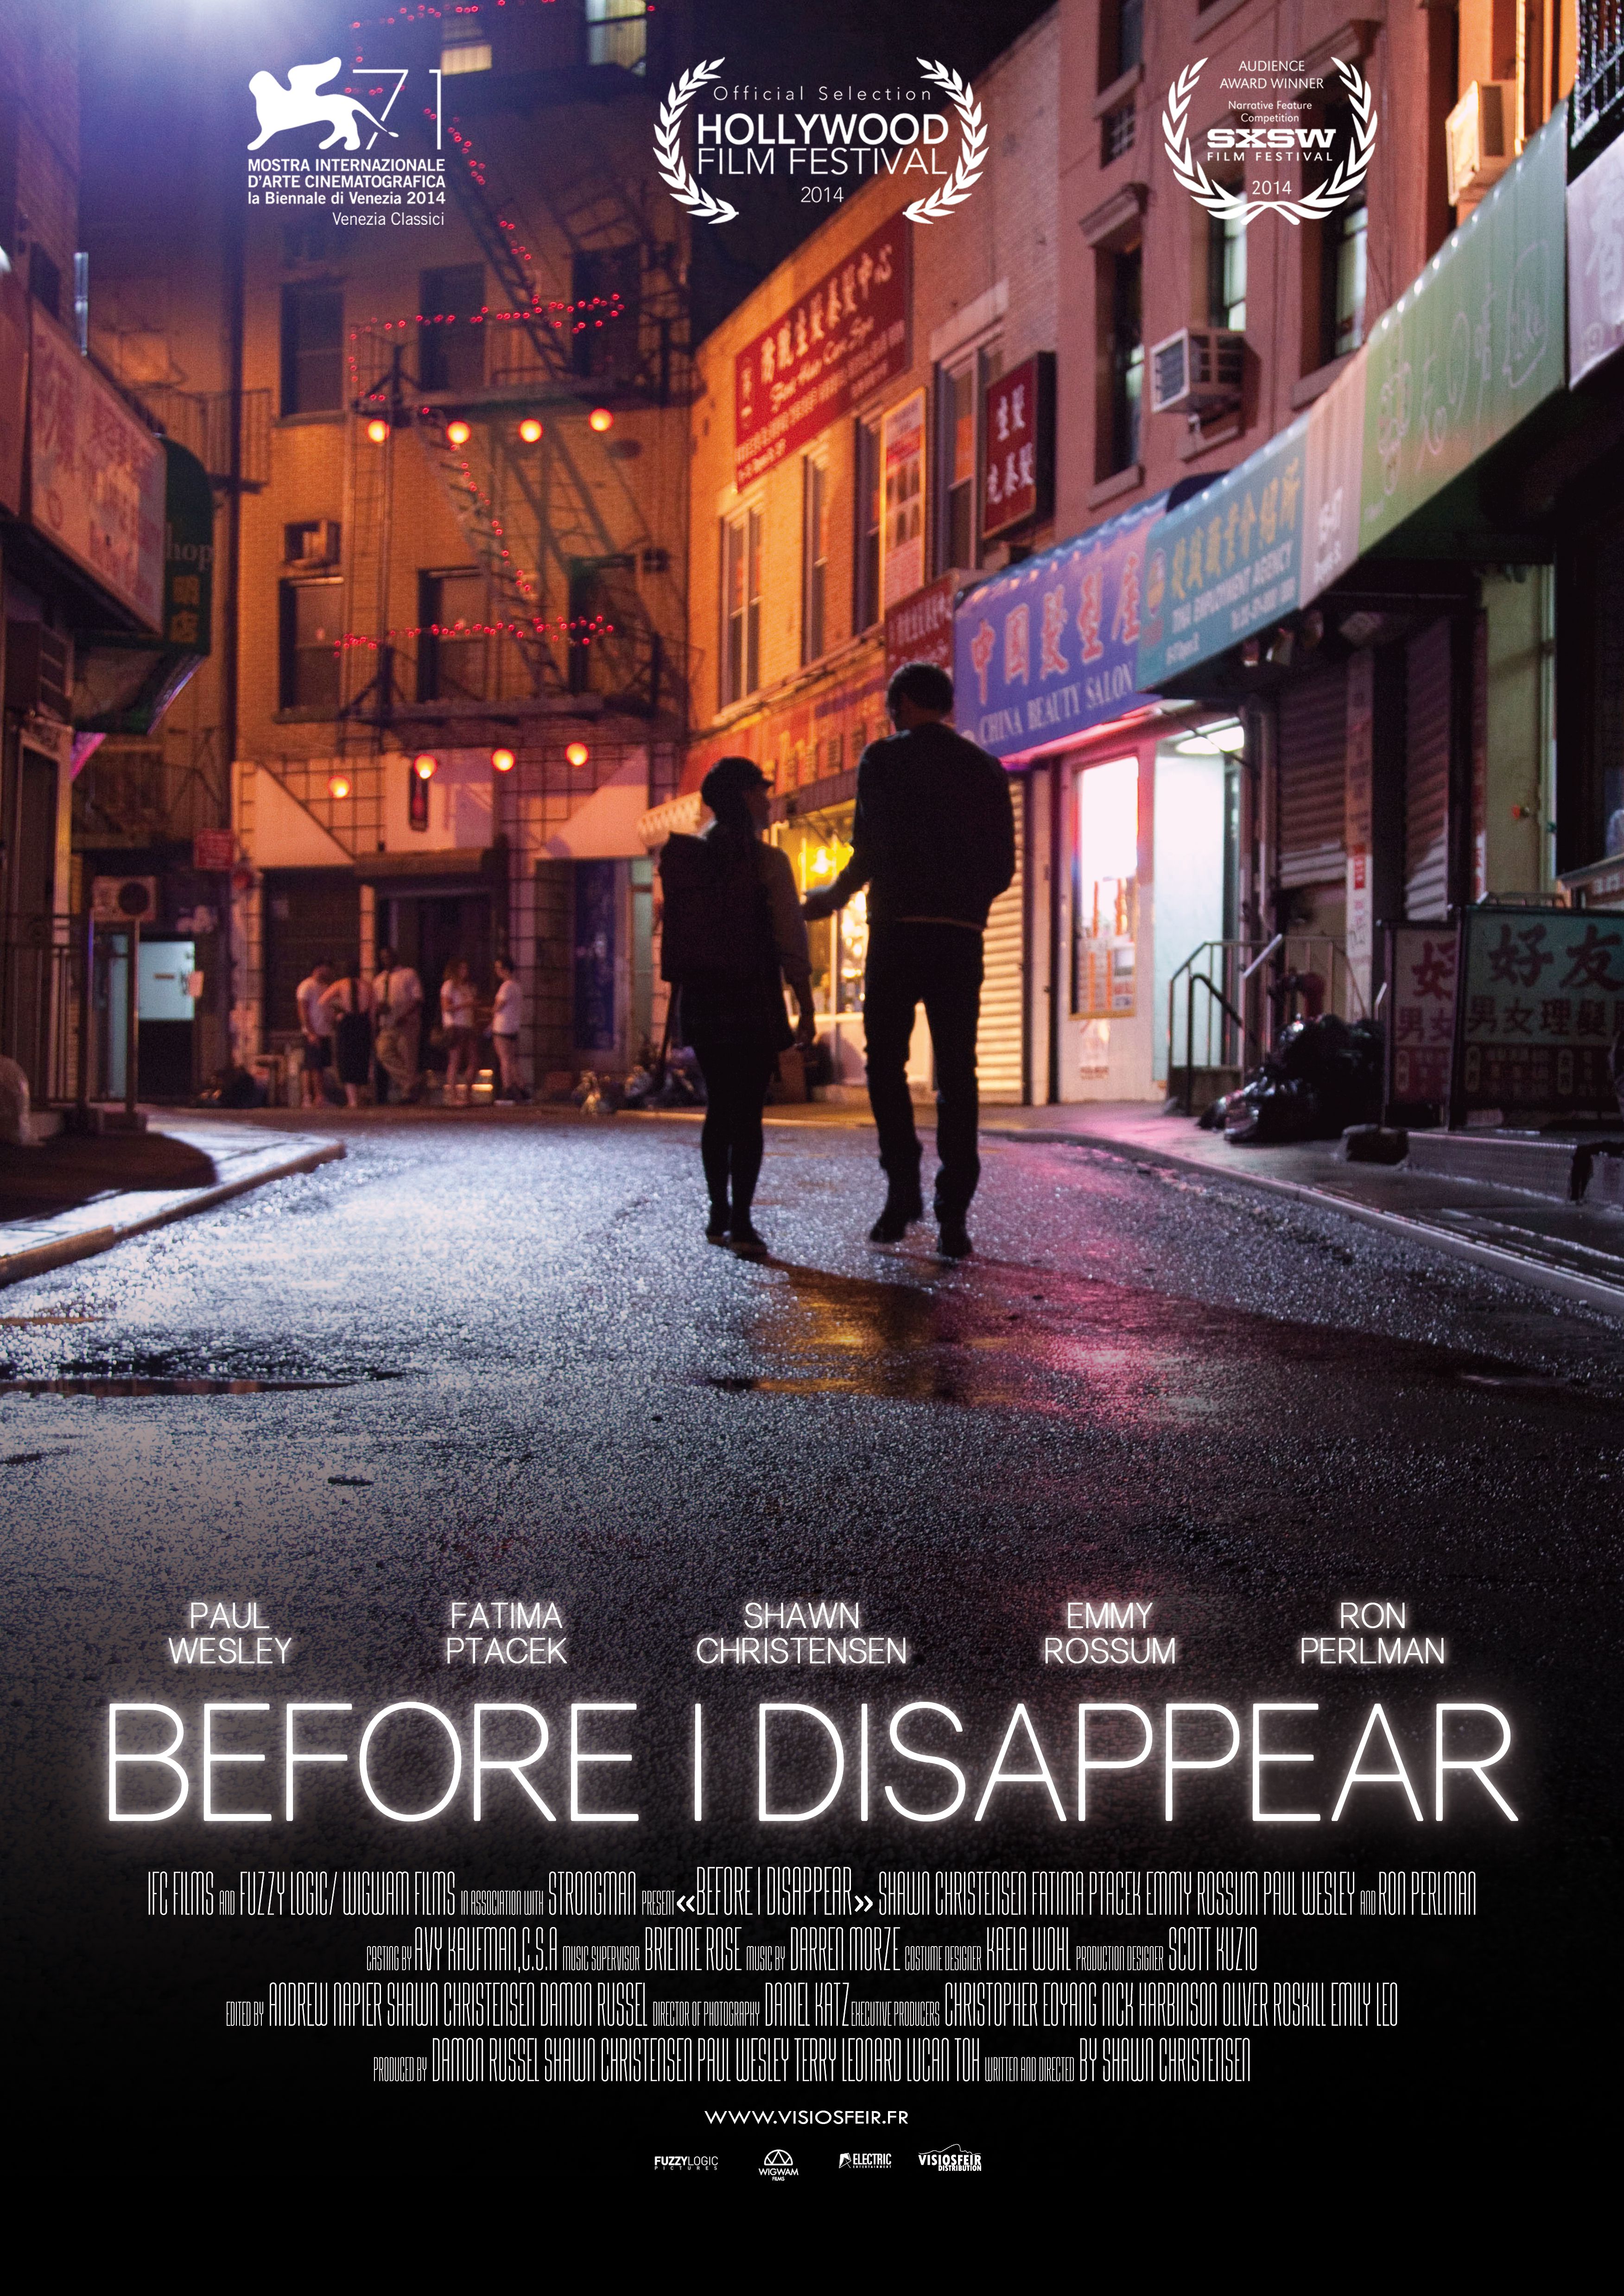 Before I Disappear - Film (2014) streaming VF gratuit complet